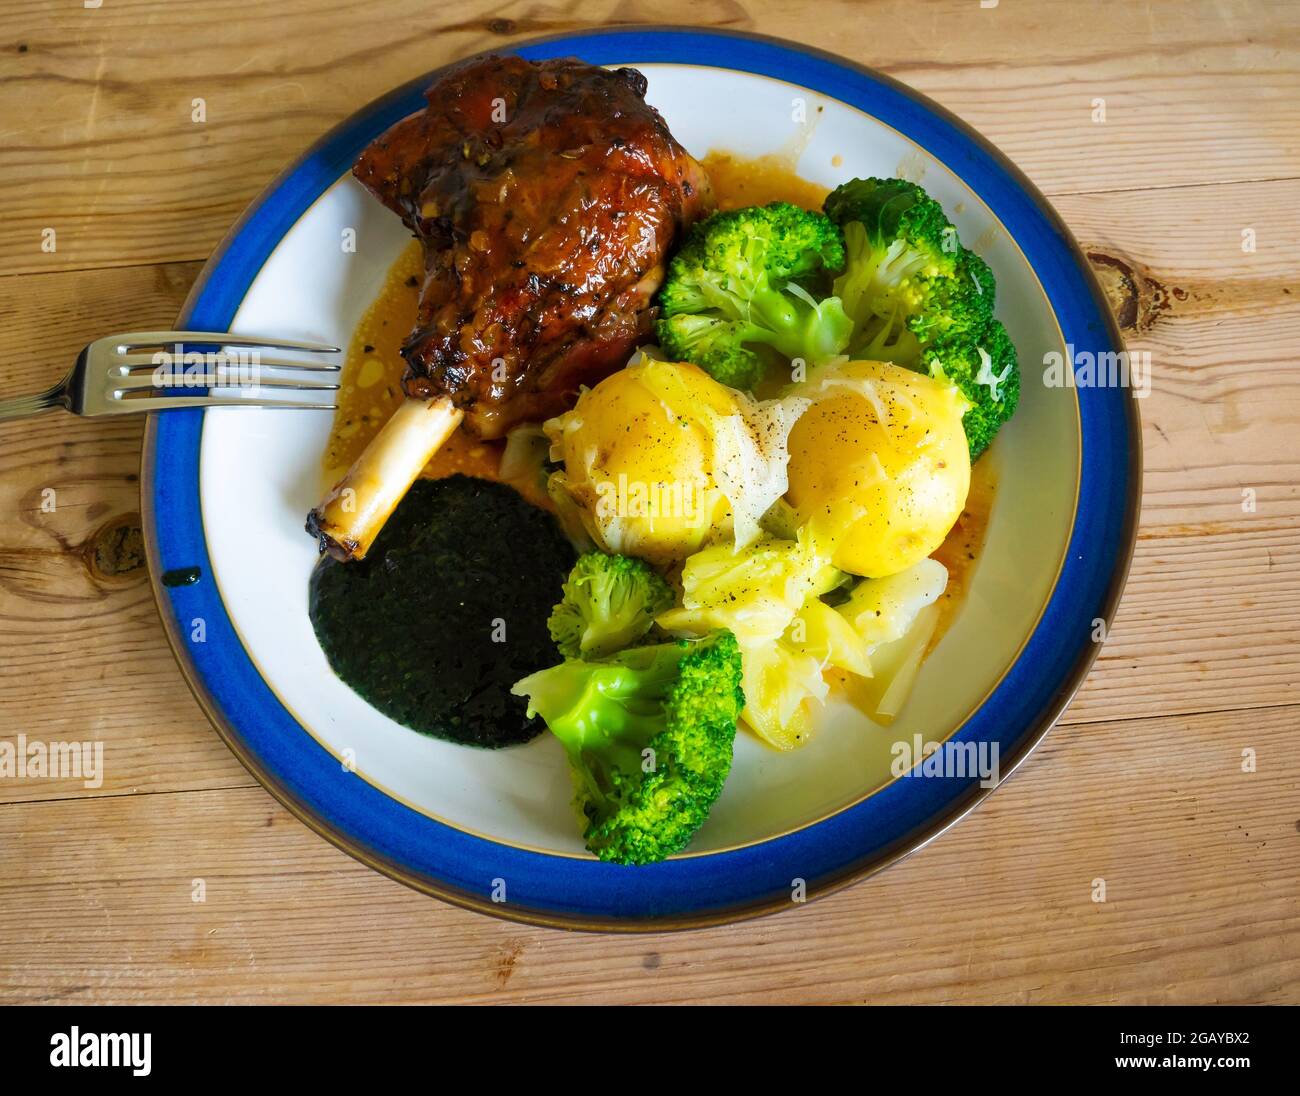 English lunch  dinner meal leg of lamb boiled new potatoes green beans broccoli and gravy on blue edged white plate on a wooden table Stock Photo